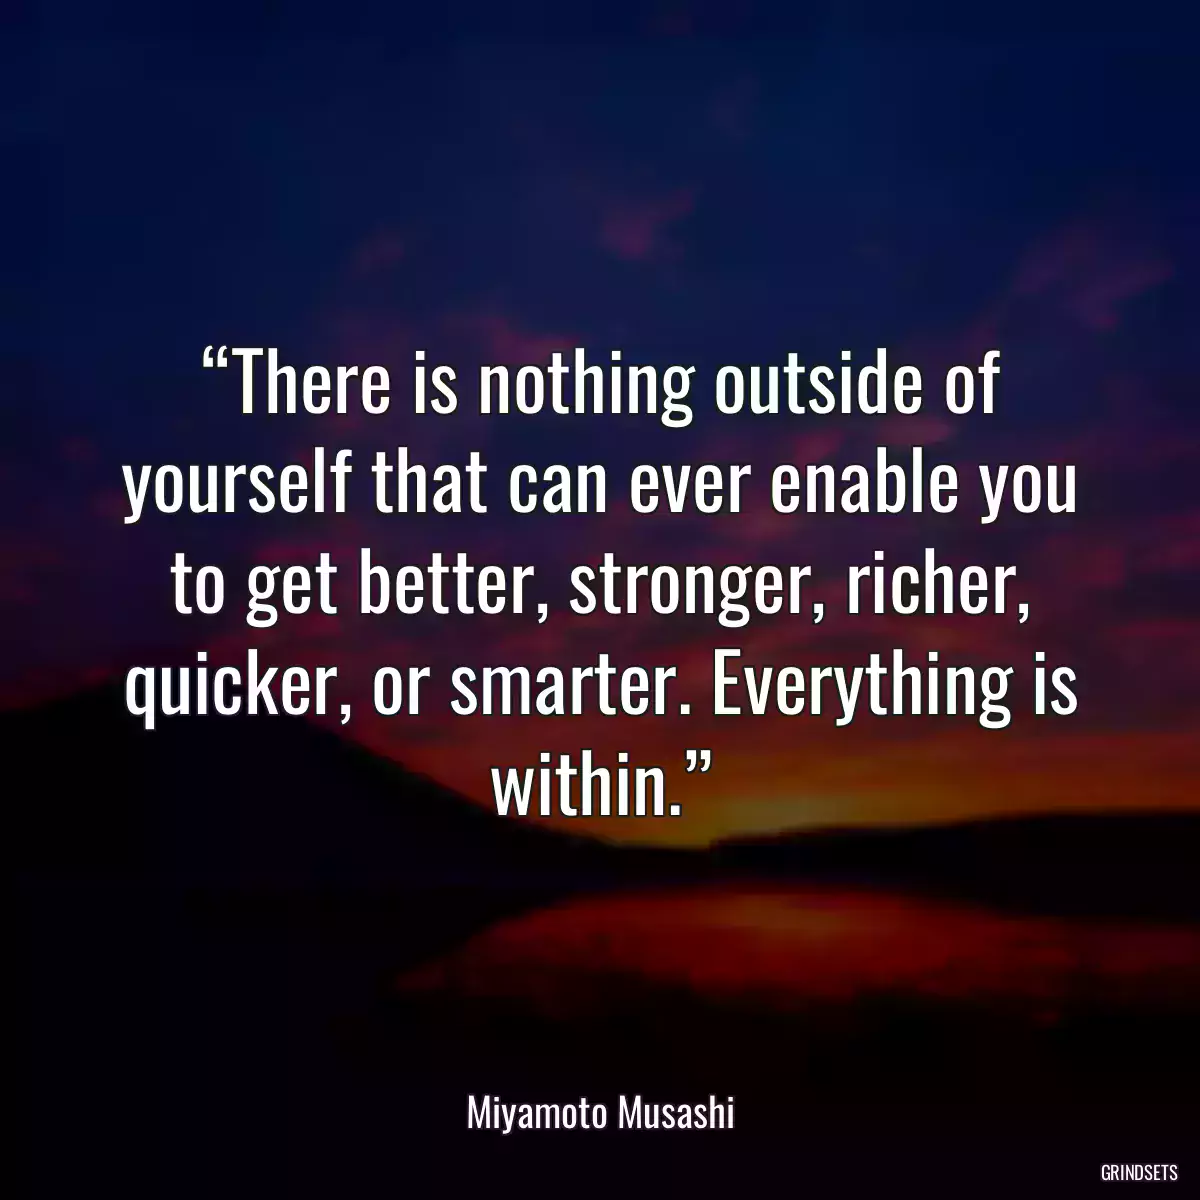 “There is nothing outside of yourself that can ever enable you to get better, stronger, richer, quicker, or smarter. Everything is within.”